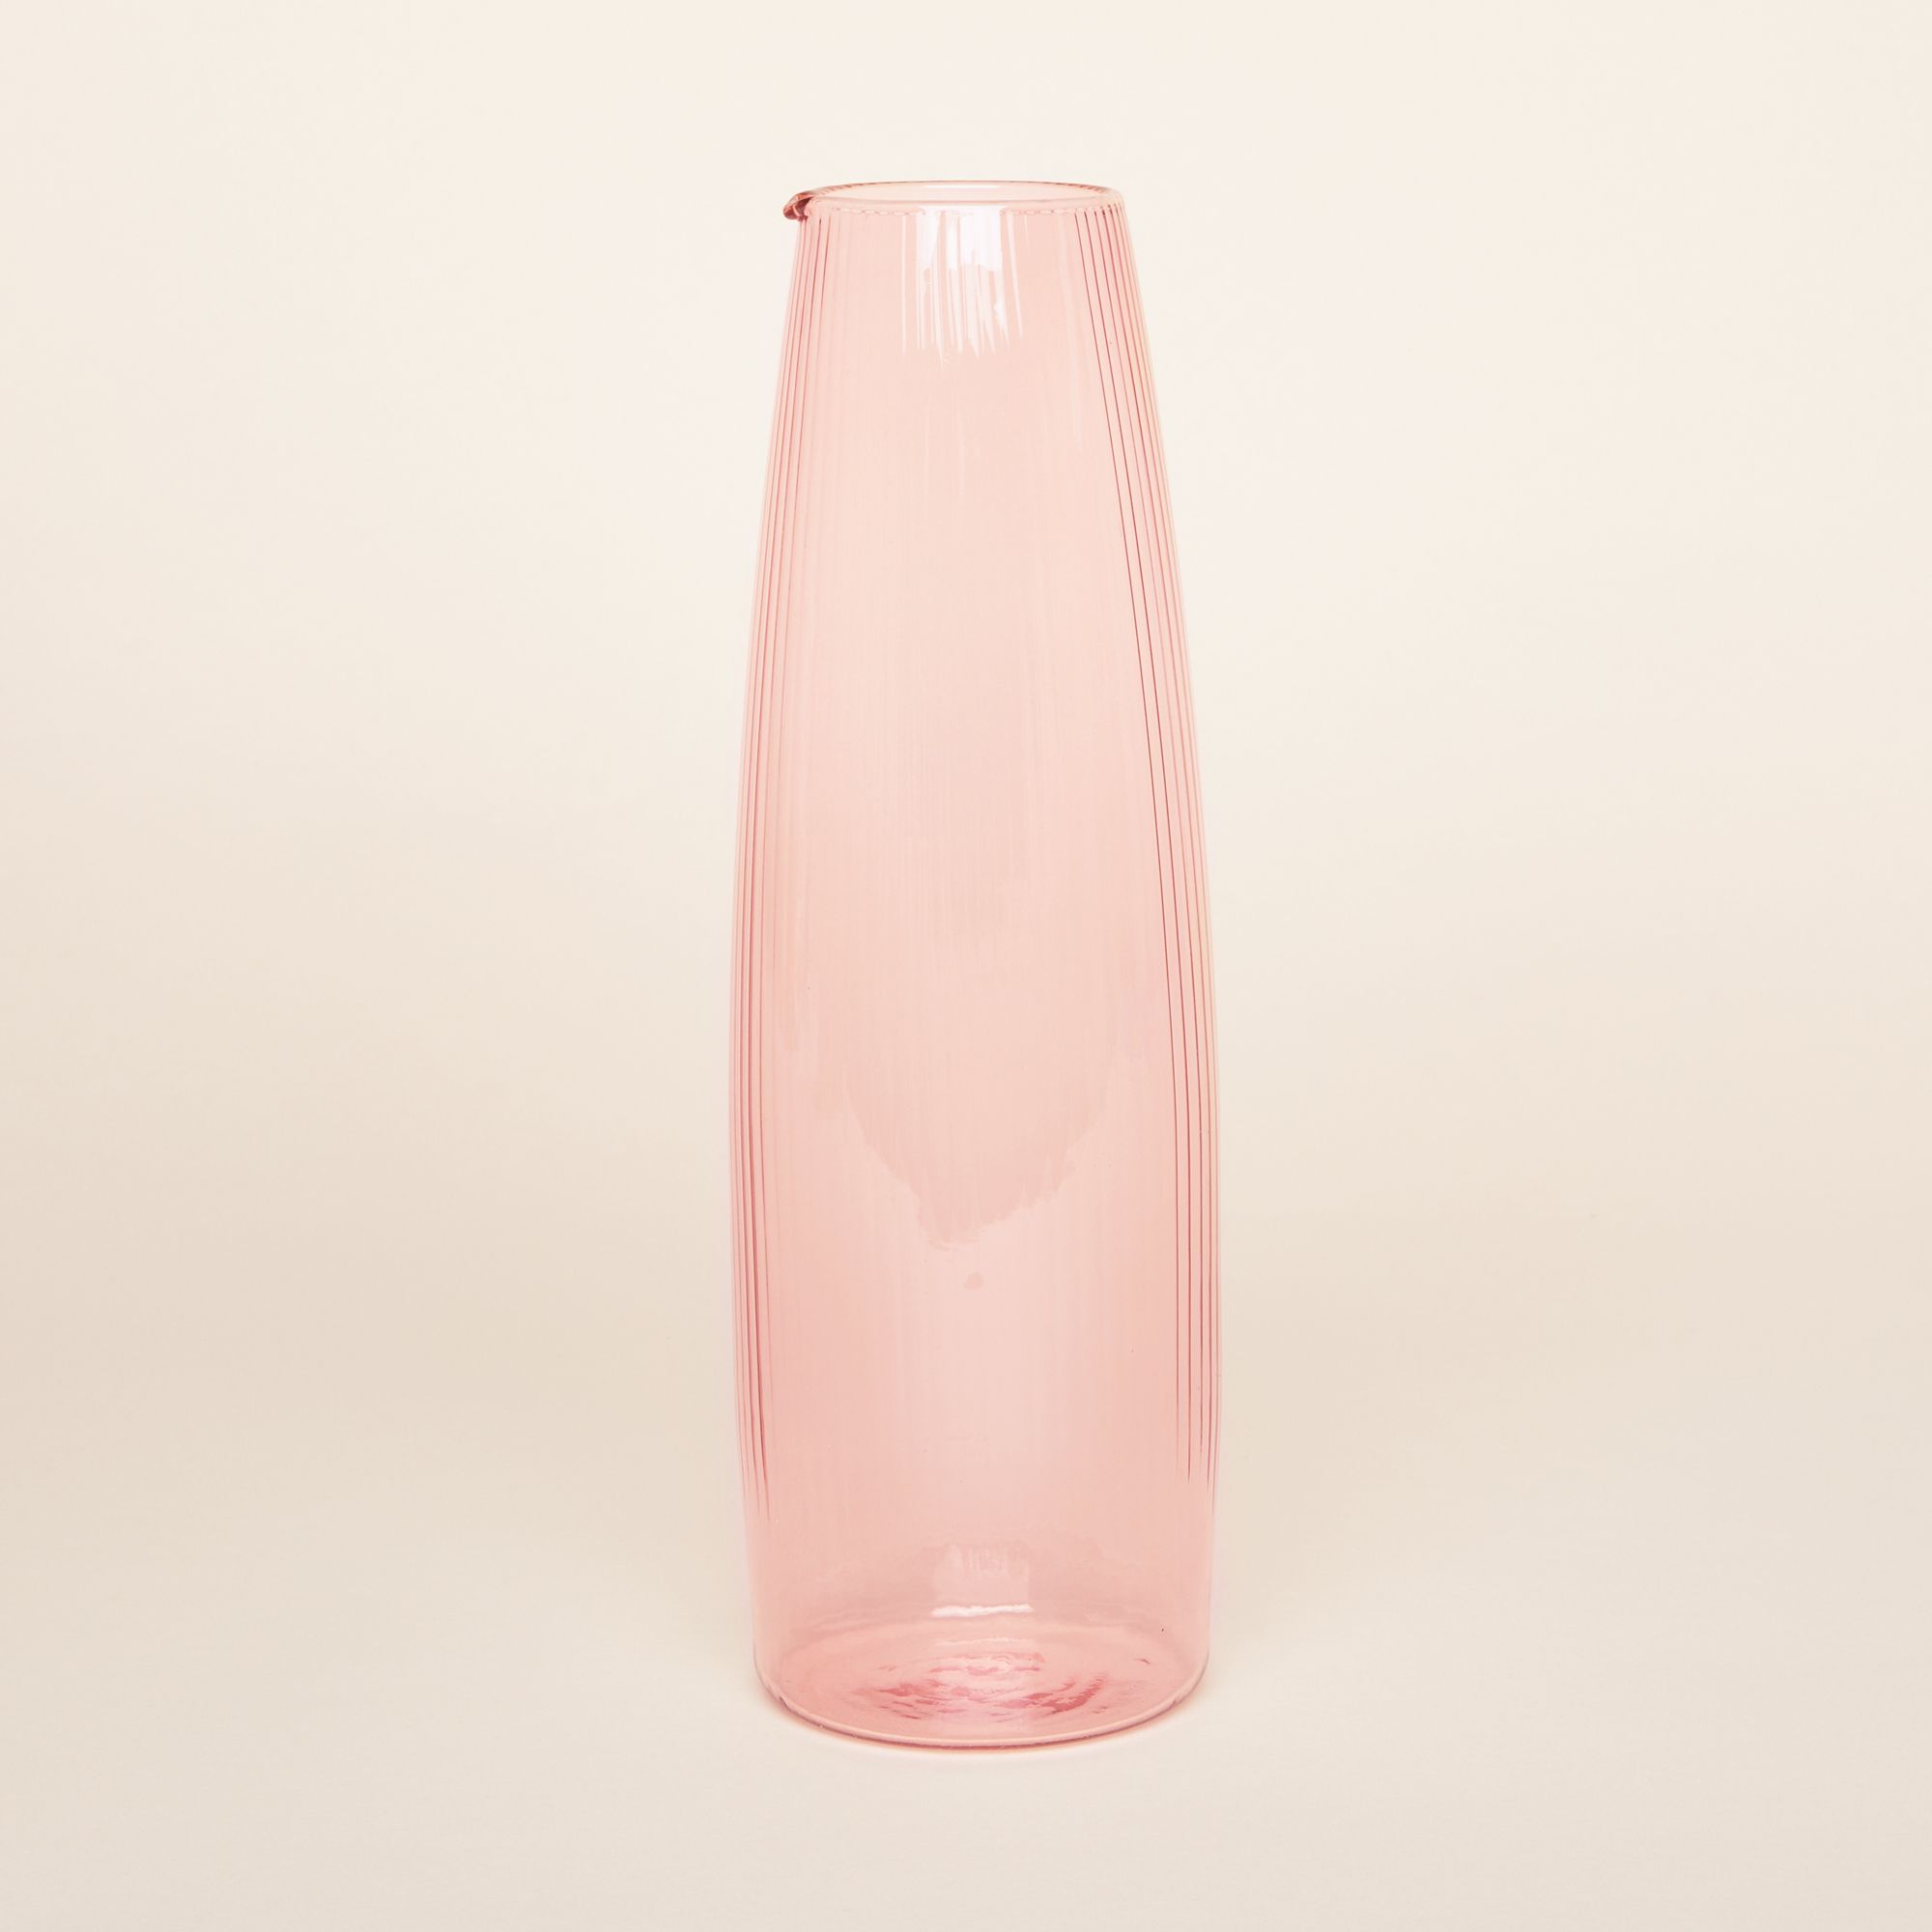 A pitcher that is tall and pale glass with vertical grooves and has a spout at the rim. Comes in three colors: pale yellow, a zesty but translucent green, and a festive but soft pink.